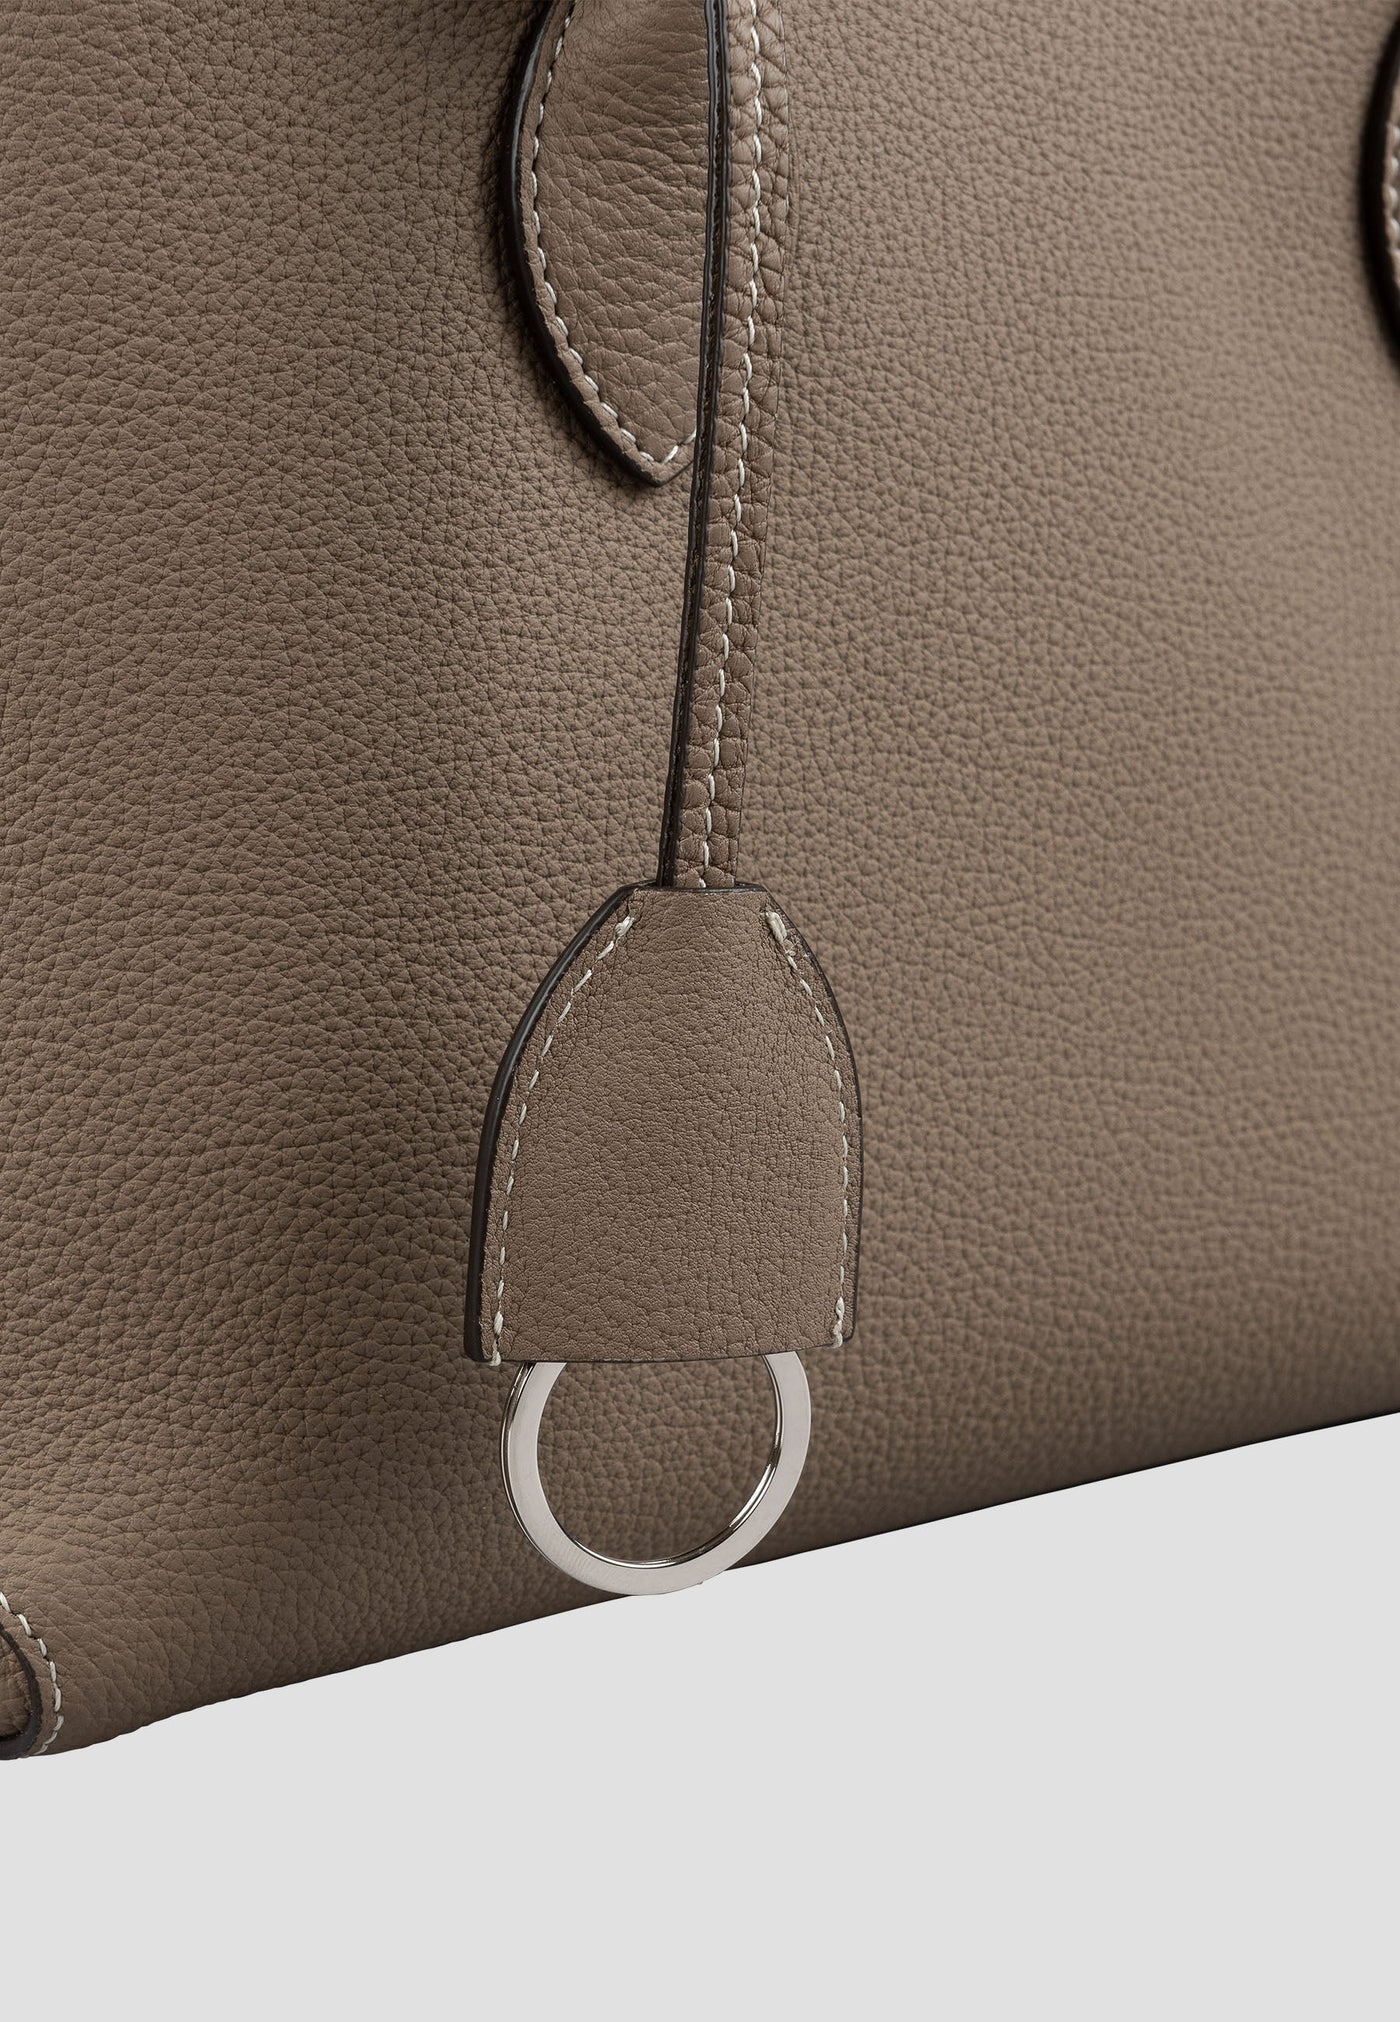 5 good reasons why full-grain leather is superior to other types of leather-BONAVENTURA